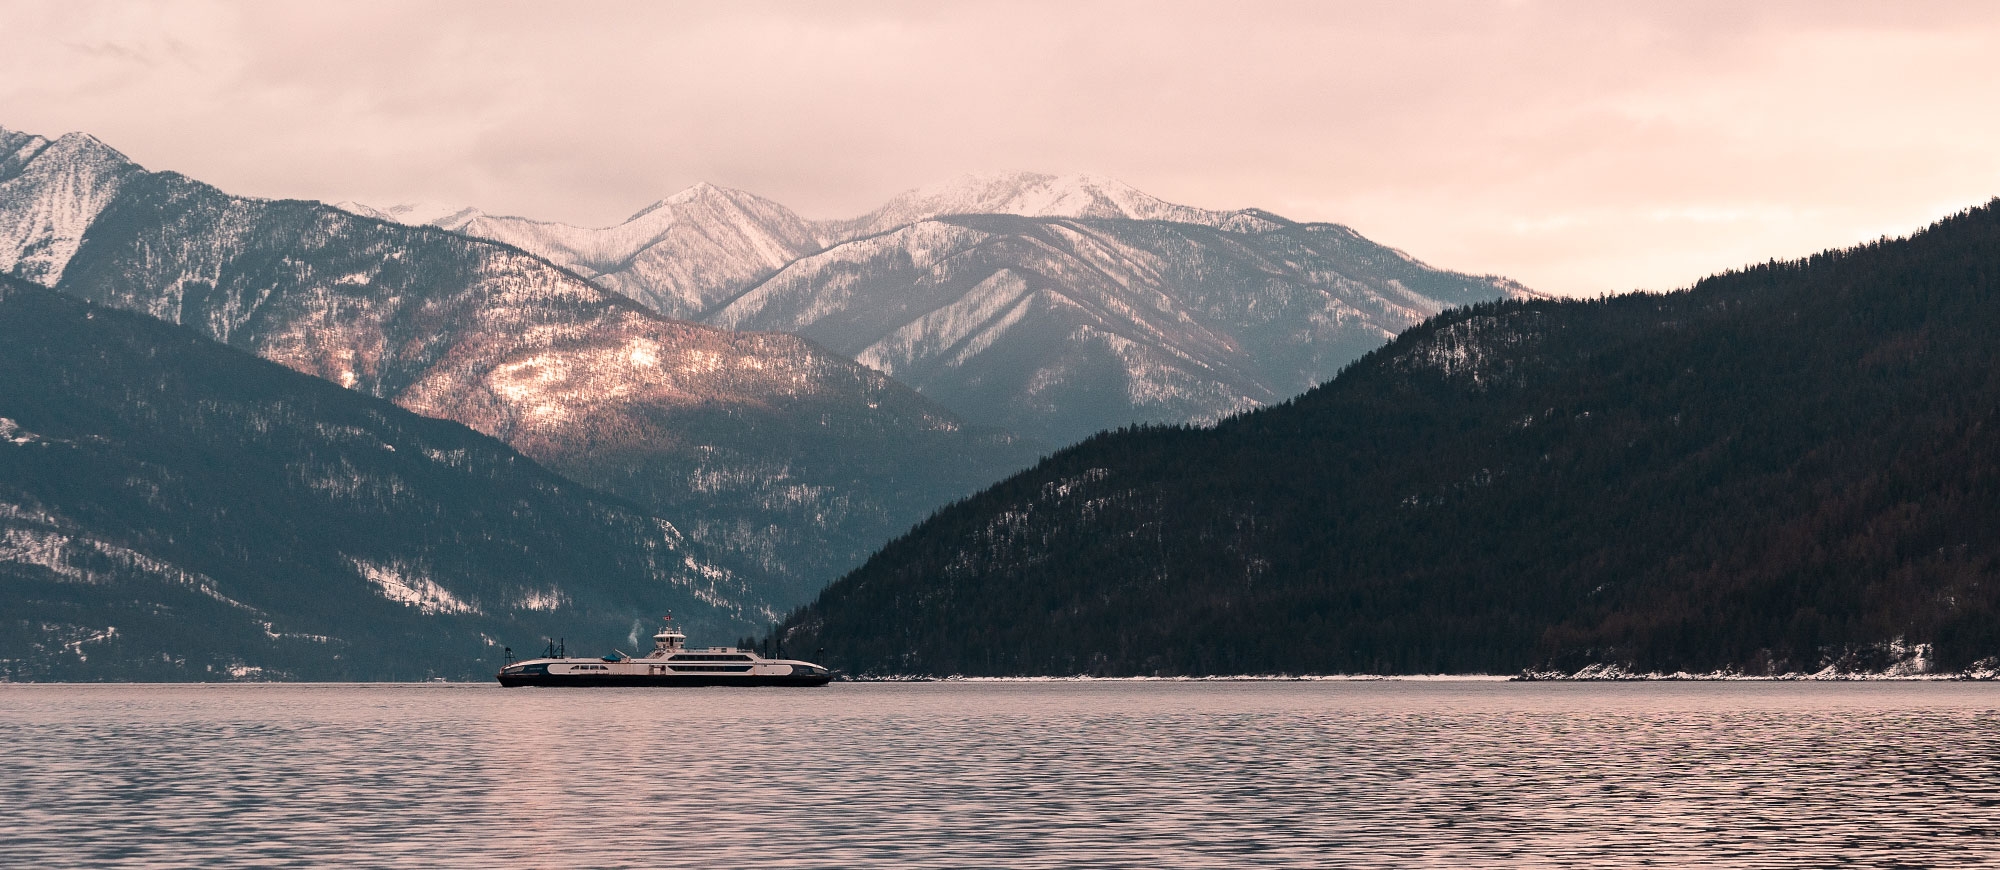 Kootenay Lake Ferry on the water with snowcapped mountains in background.